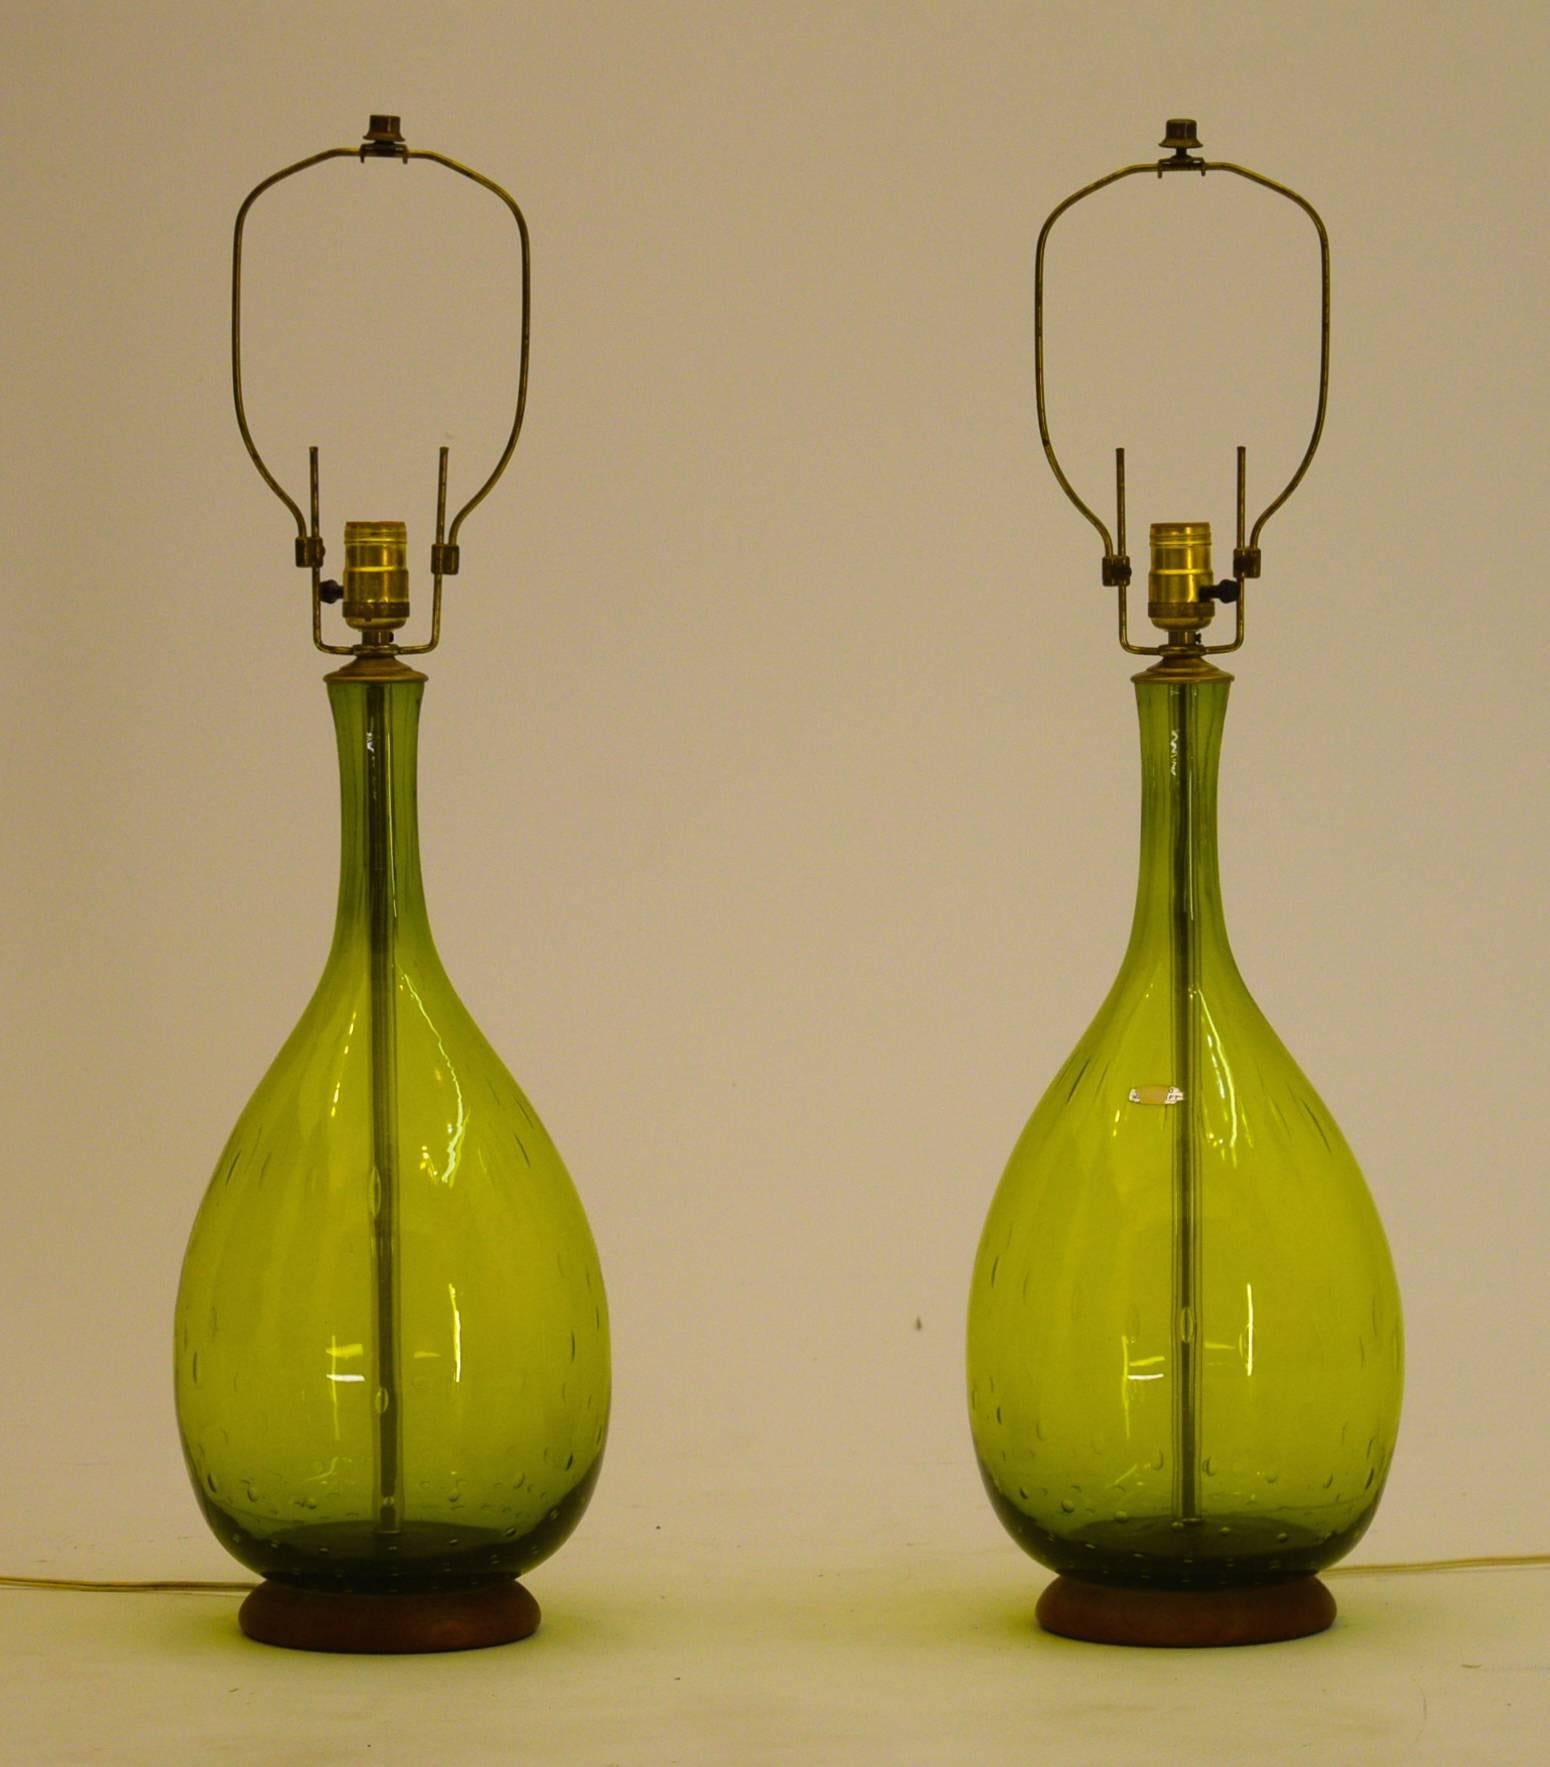 Blenko, Joel Myers
USA
1967
8.5 wide by 33 inch tall.

A pair of handblown glass Blenko table lamps designed by Joel Myers in and produced in 1967 in perfect working order. These lamps have the 